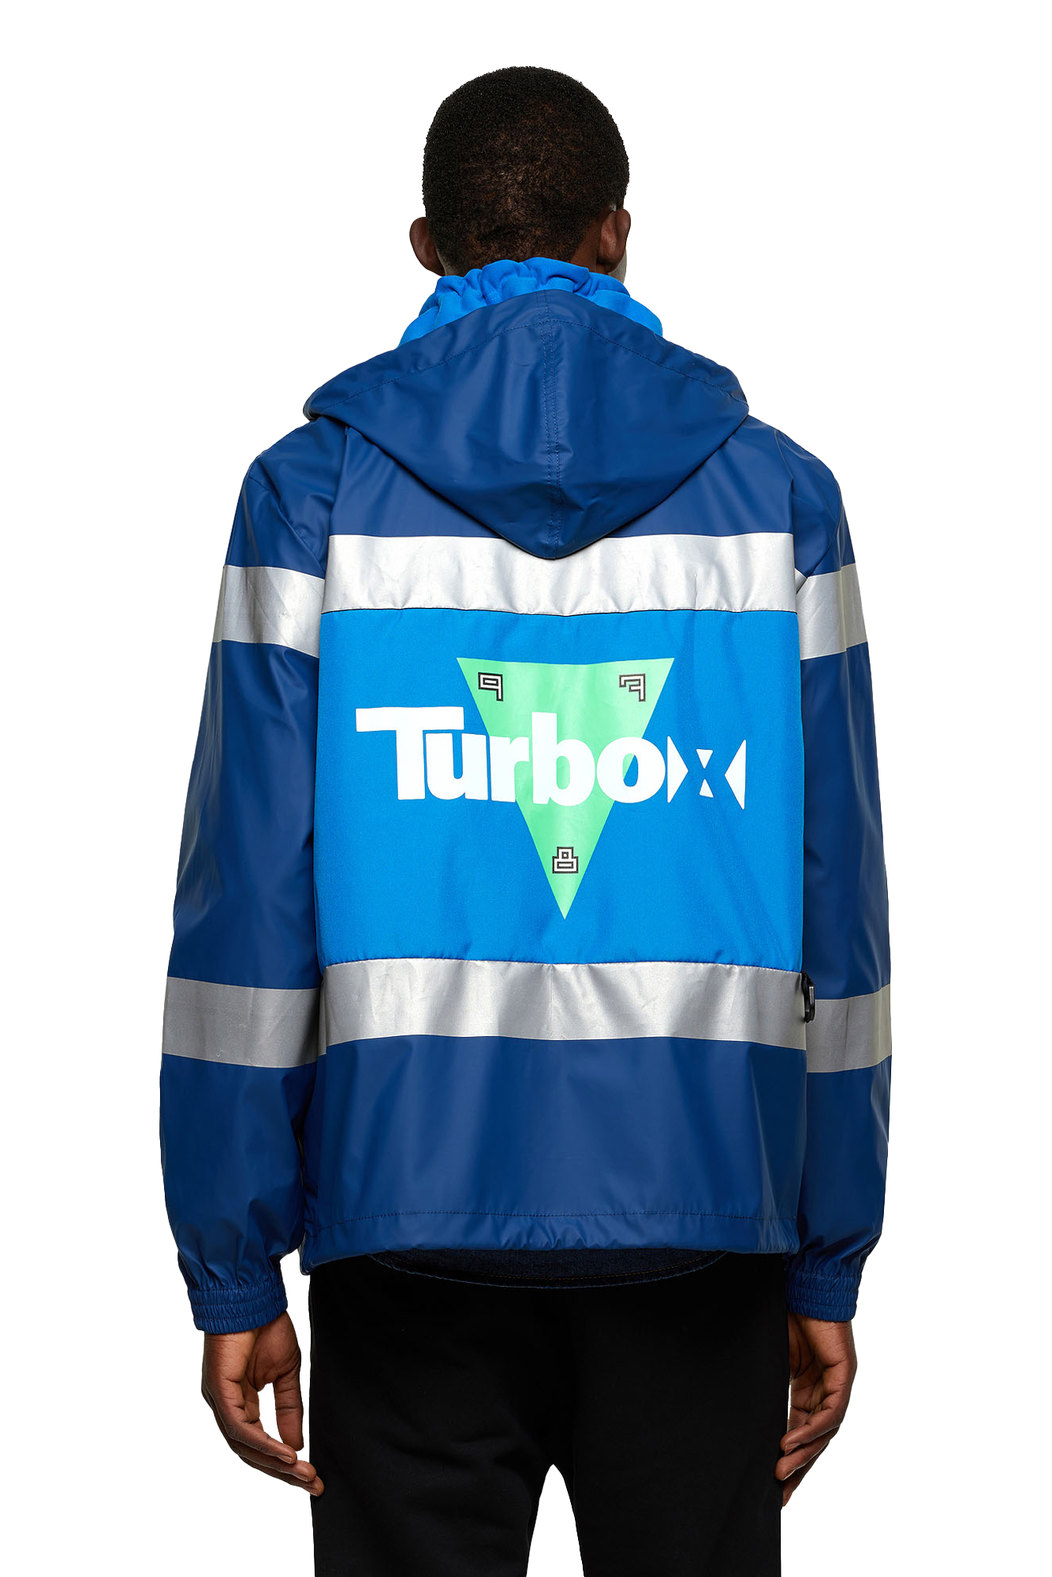 Hooded jacket with reflective bands